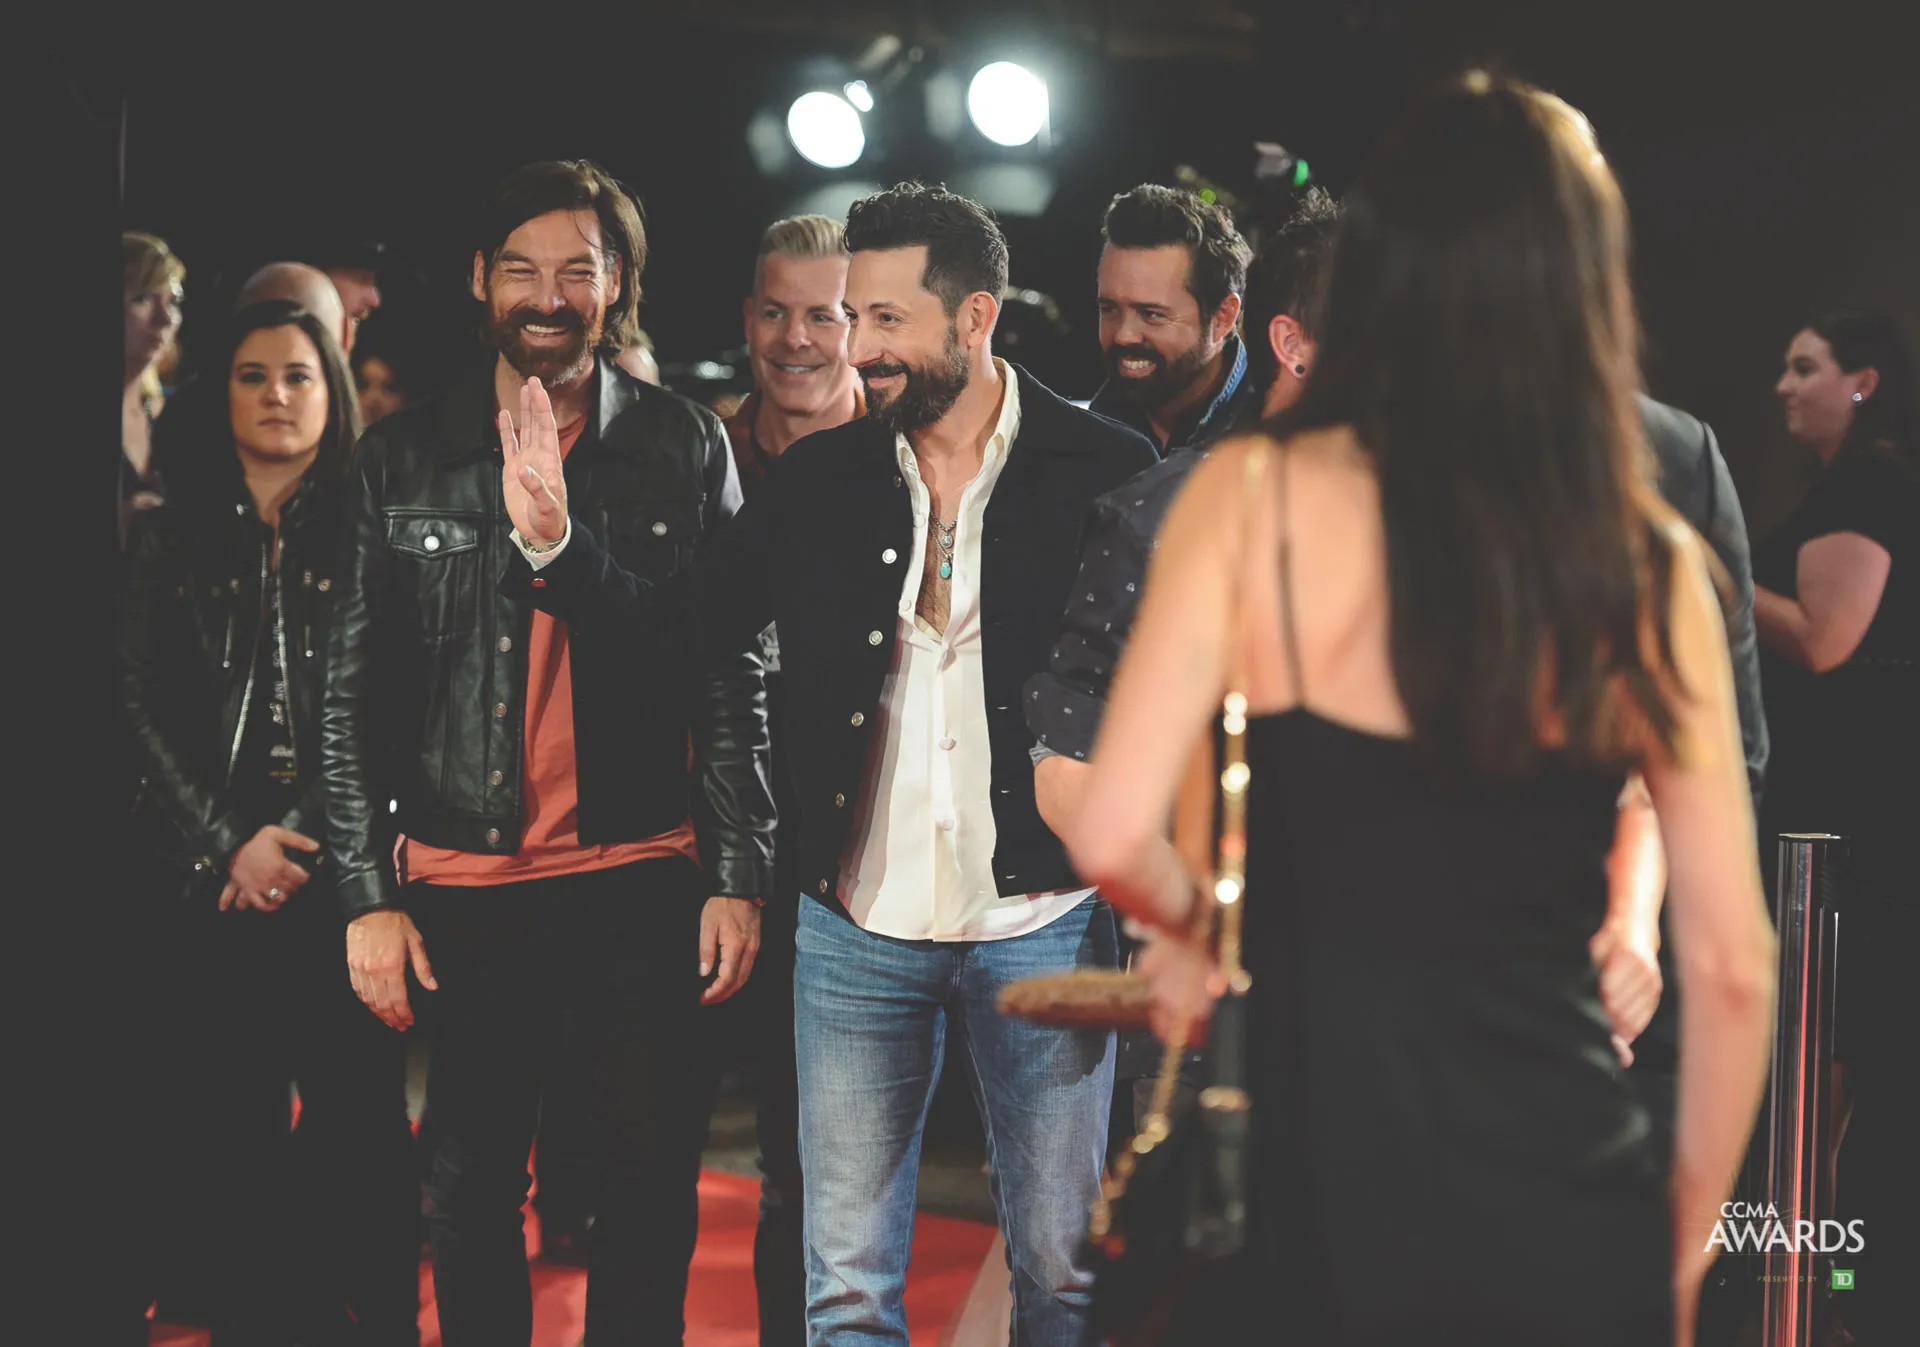 Old Dominion at the 2019 Canadian Country Music Awards in Calgary